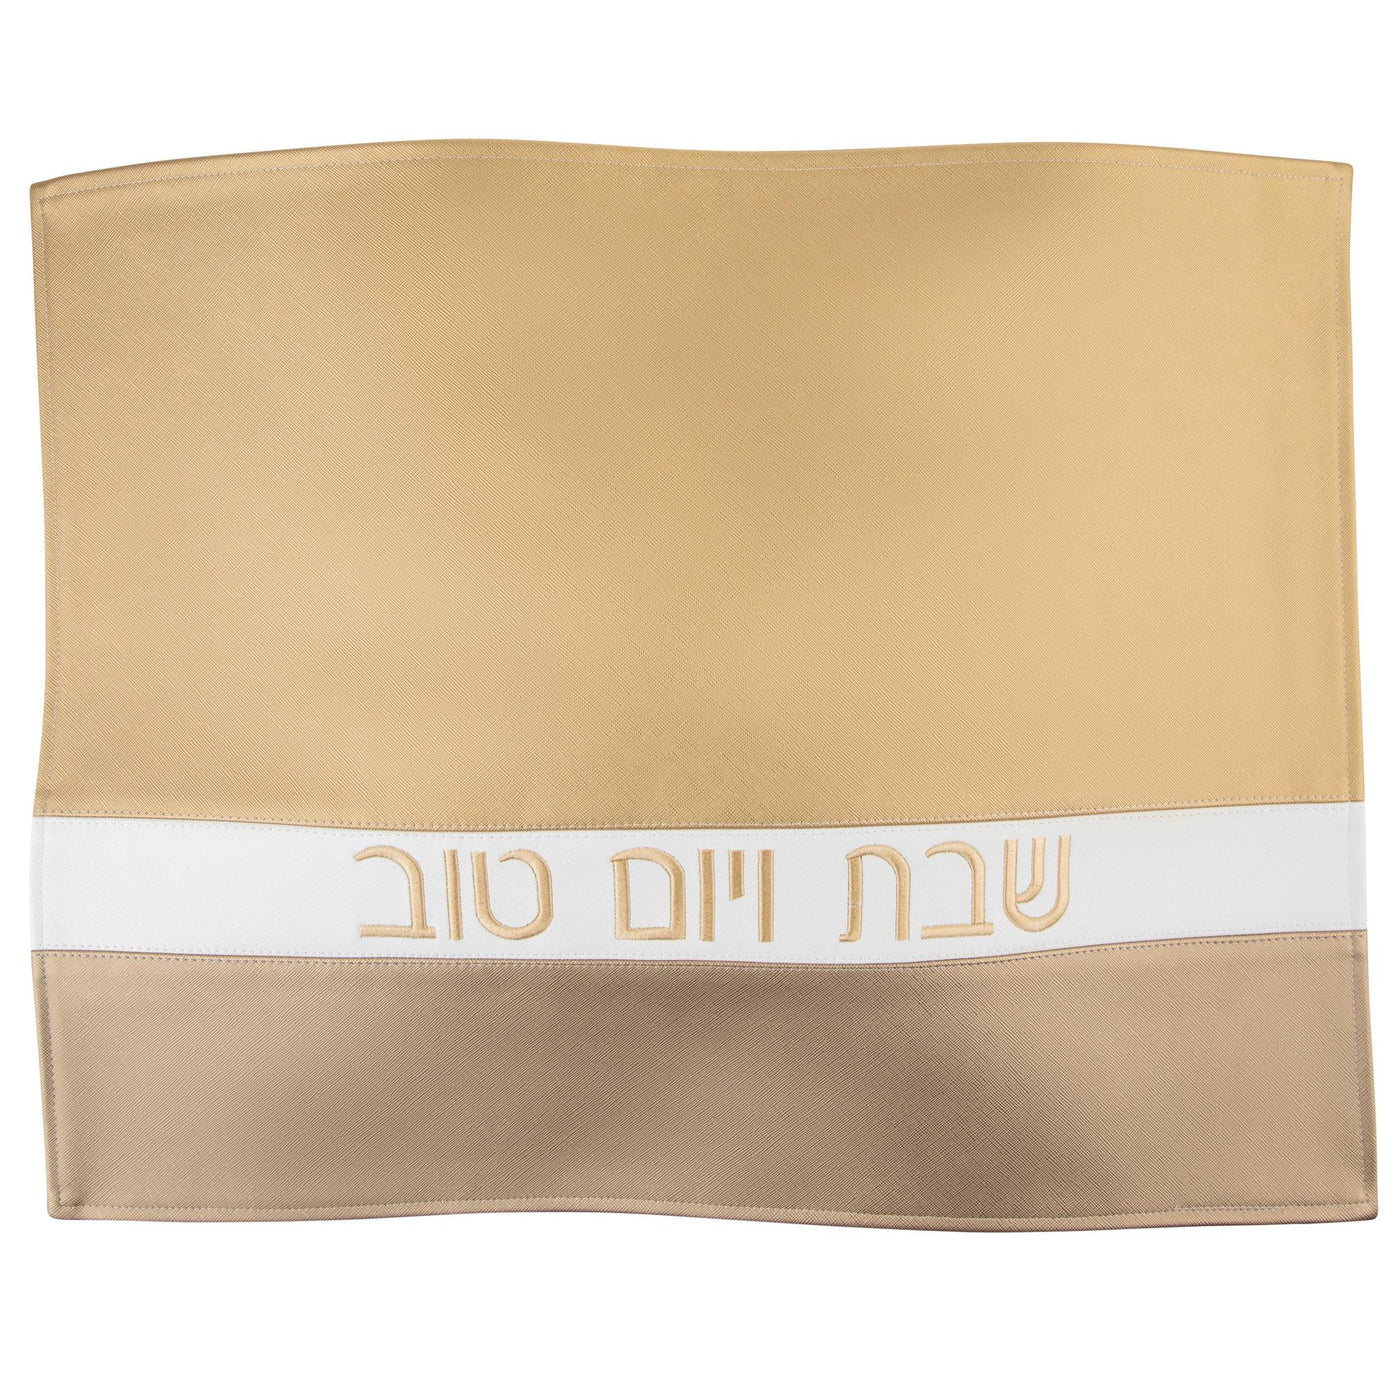 Horizontal Leather Challah Cover (Dark Gold/White/Gold) - Set With Style